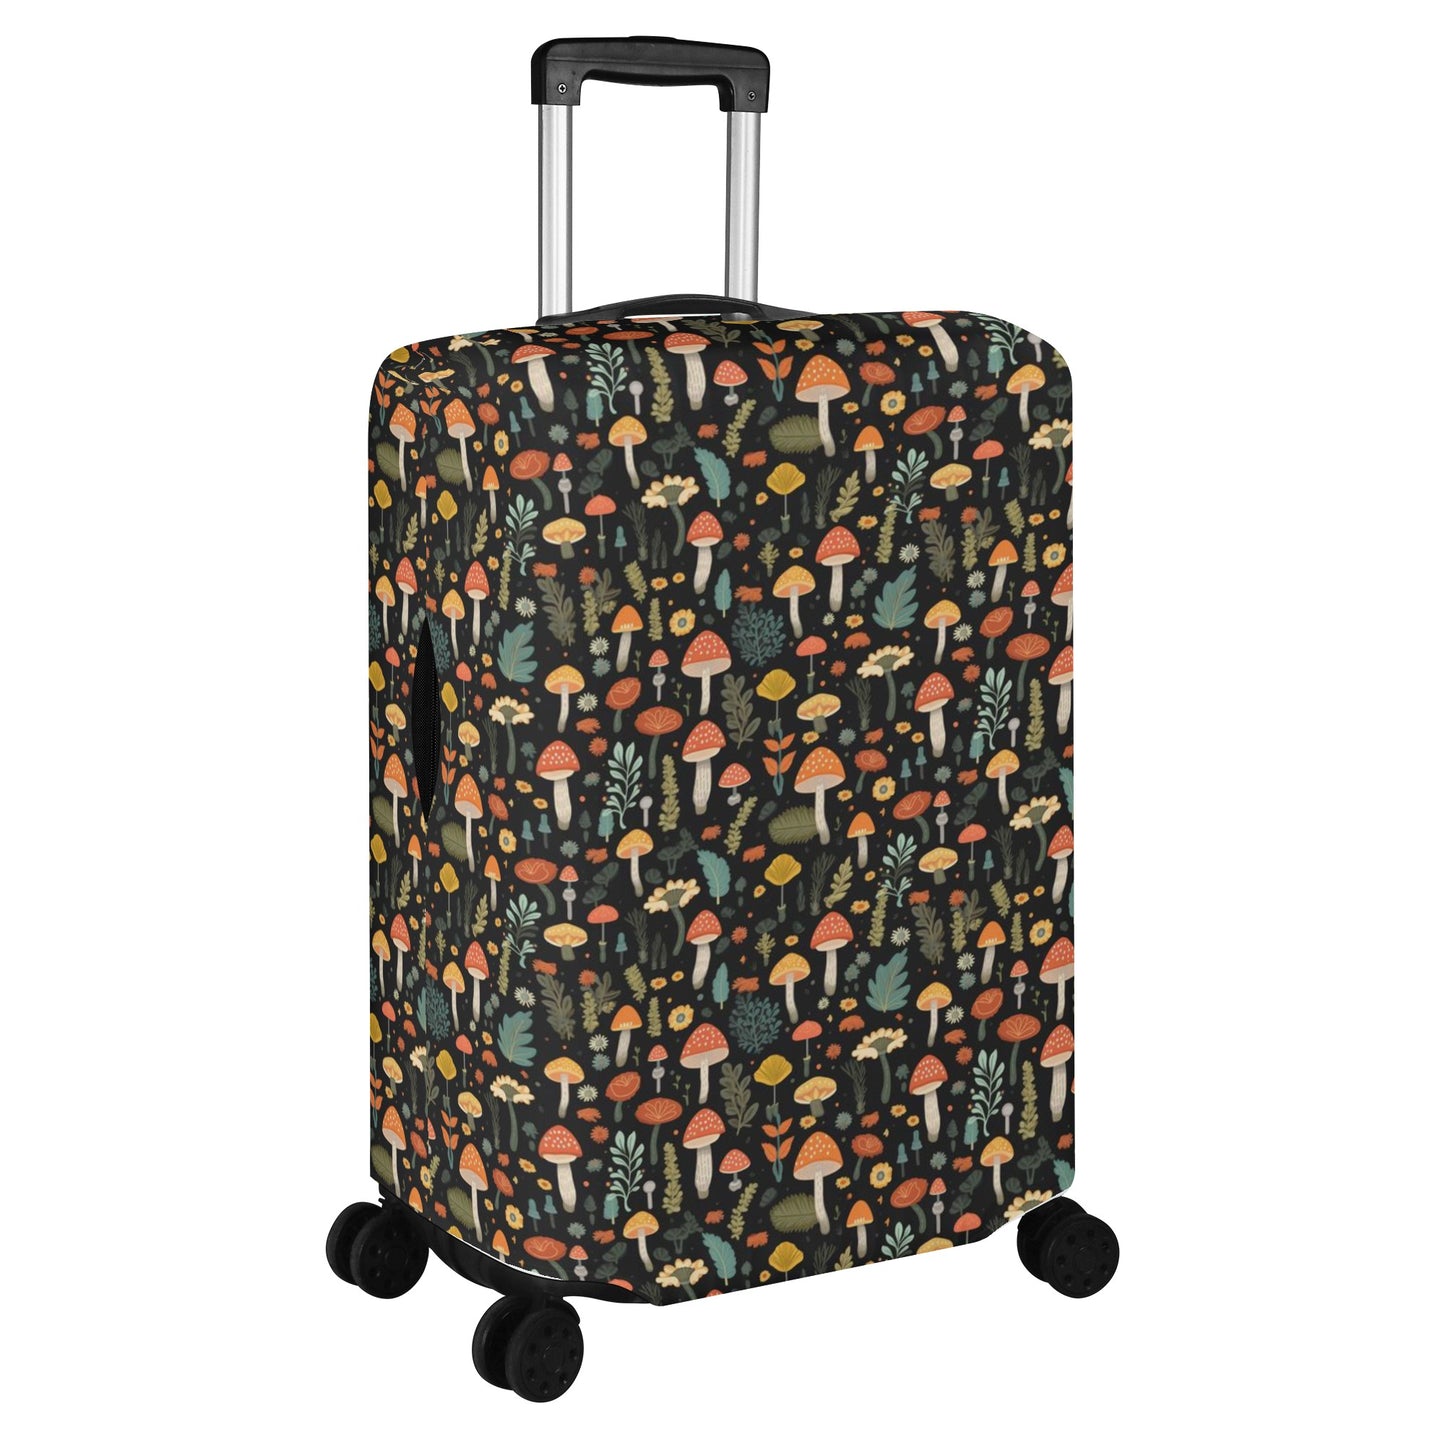 Mushroom Luggage Cover, Floral Cottagecore Suitcase Protector Hard Carry On Bag Washable Wrap Large Small Travel Aesthetic Sleeve